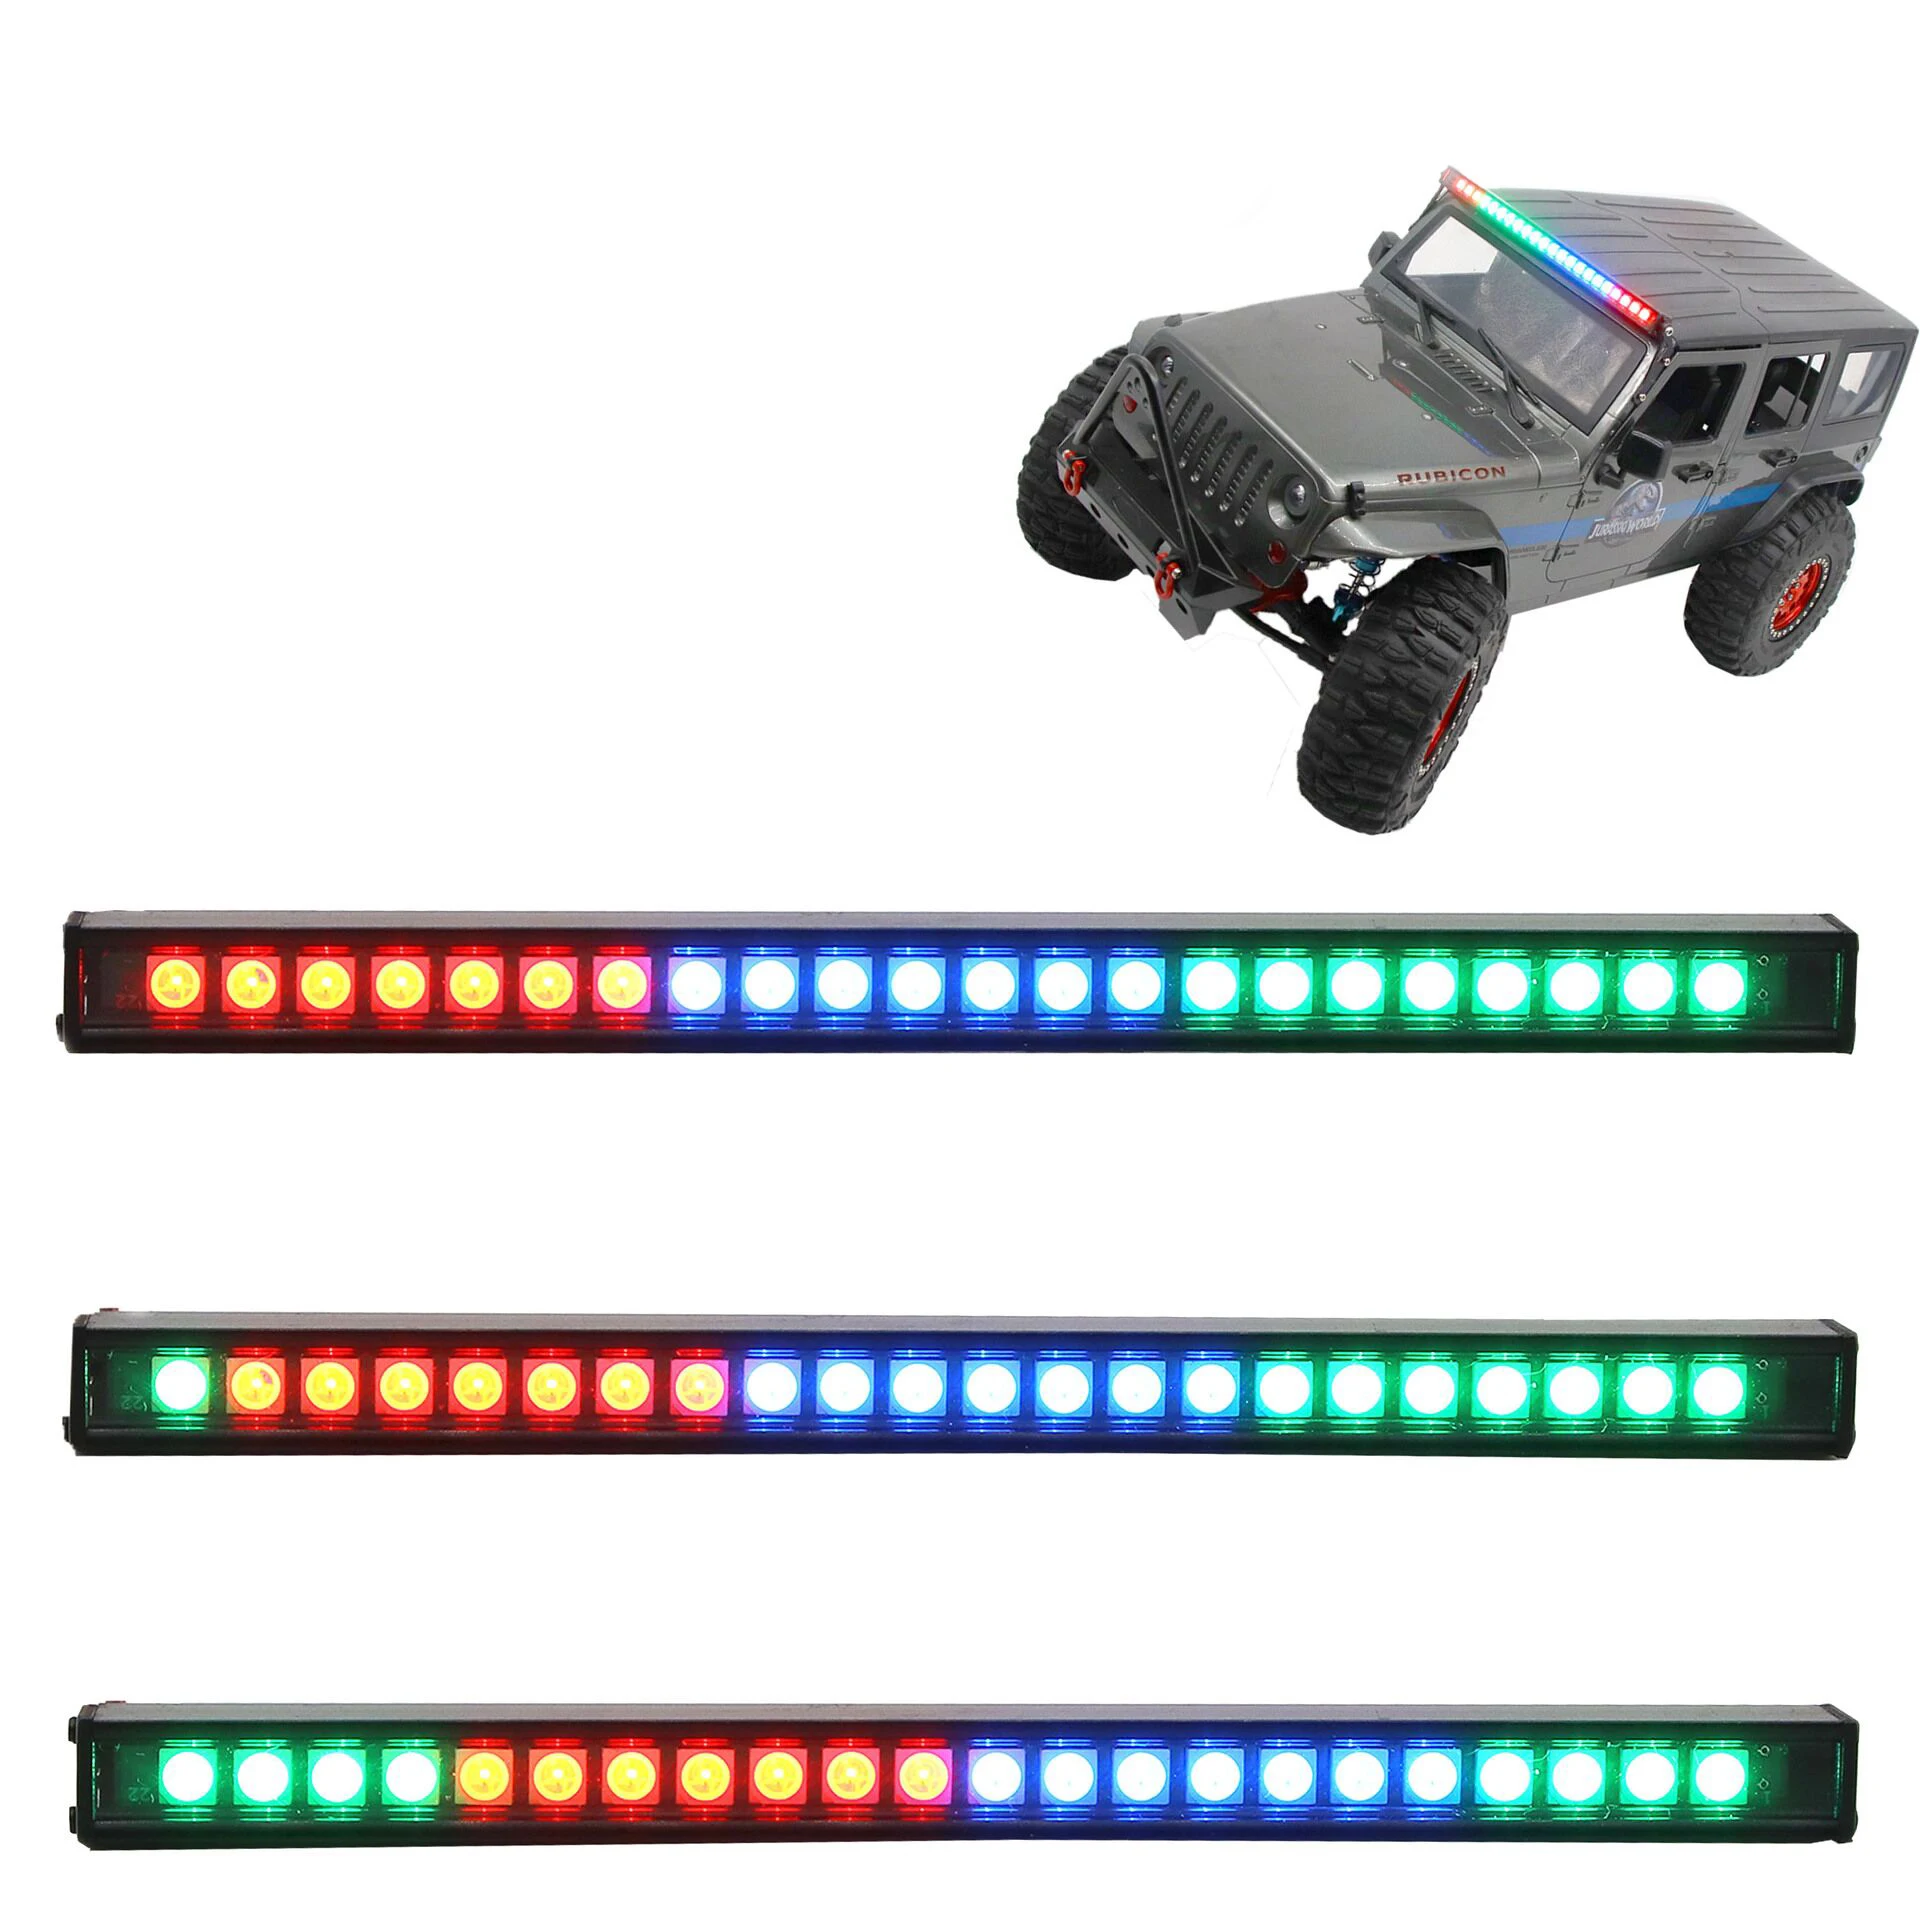 Details about   7 Colors RGB LED Roof Flashing Lamp Light Bar for 1:10 RC Crawler Car TRX4 SCX10 